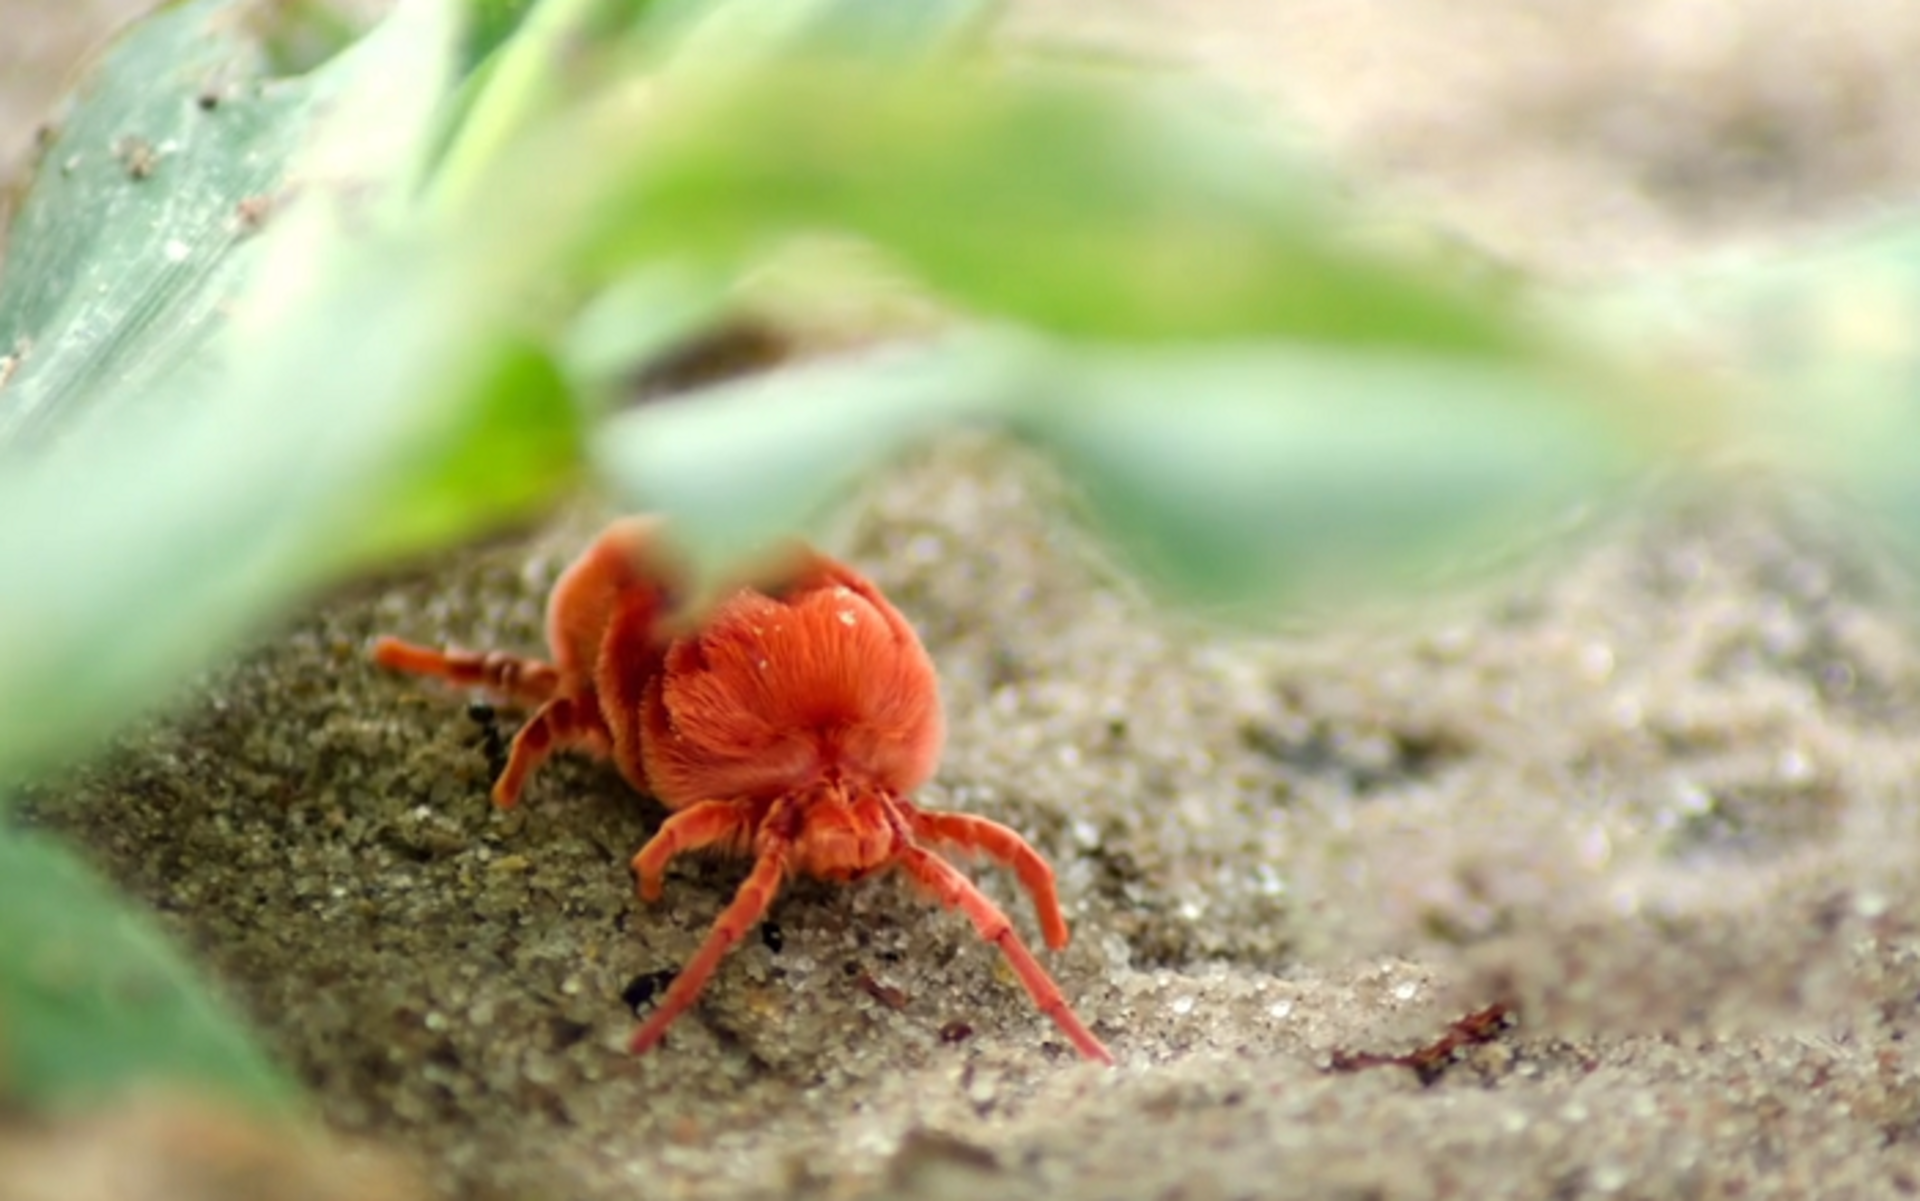 They're tiny, but everywhere. The truth behind these little red crawlies